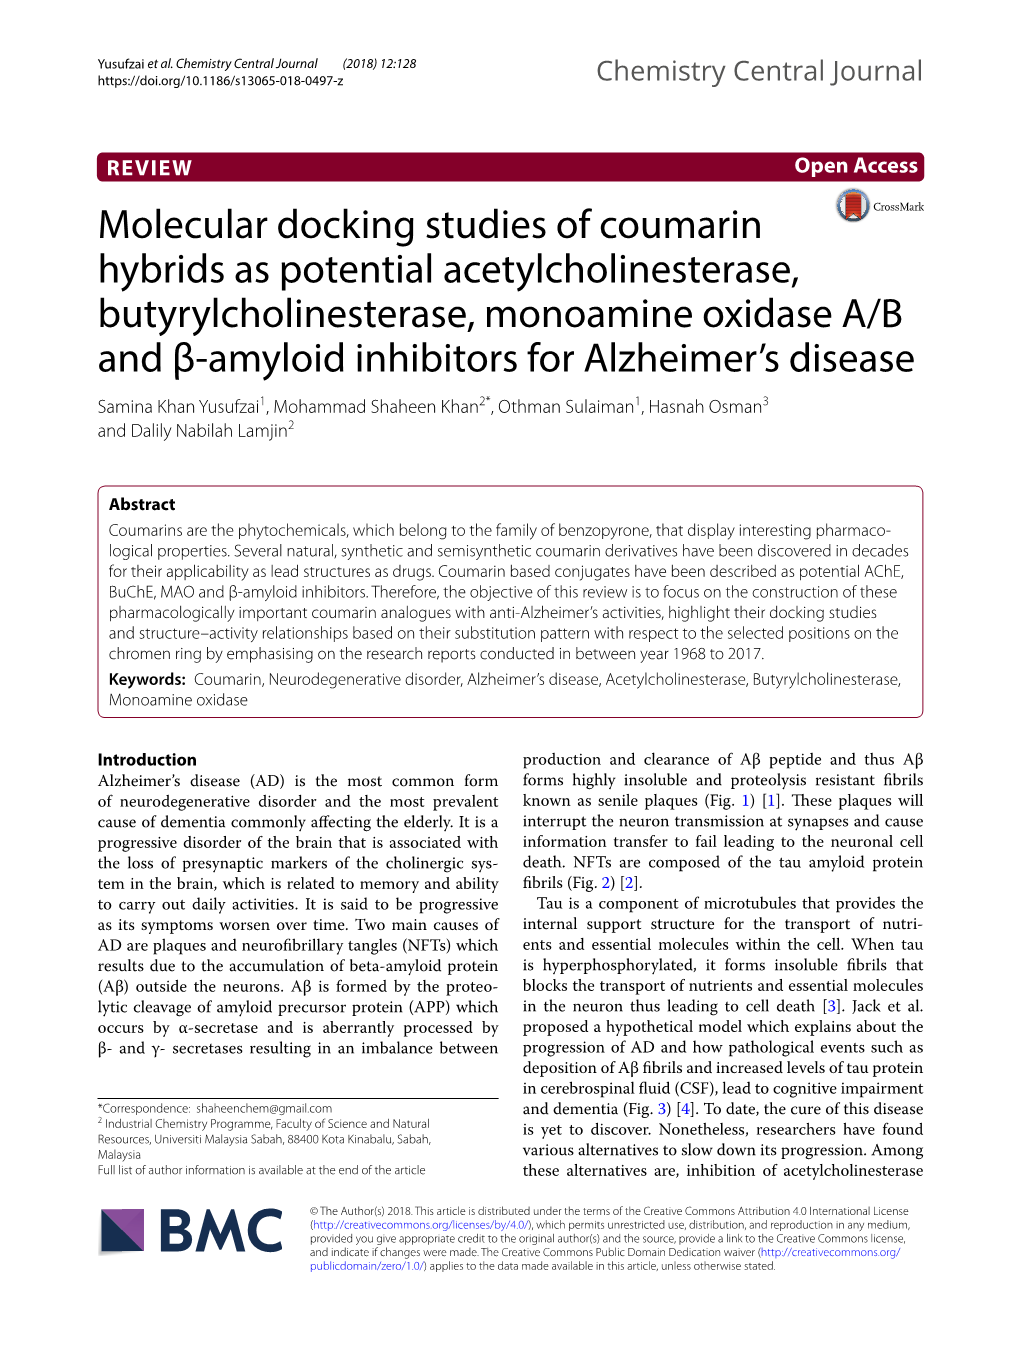 Molecular Docking Studies of Coumarin Hybrids As Potential Acetylcholinesterase, Butyrylcholinesterase, Monoamine Oxidase A/B An